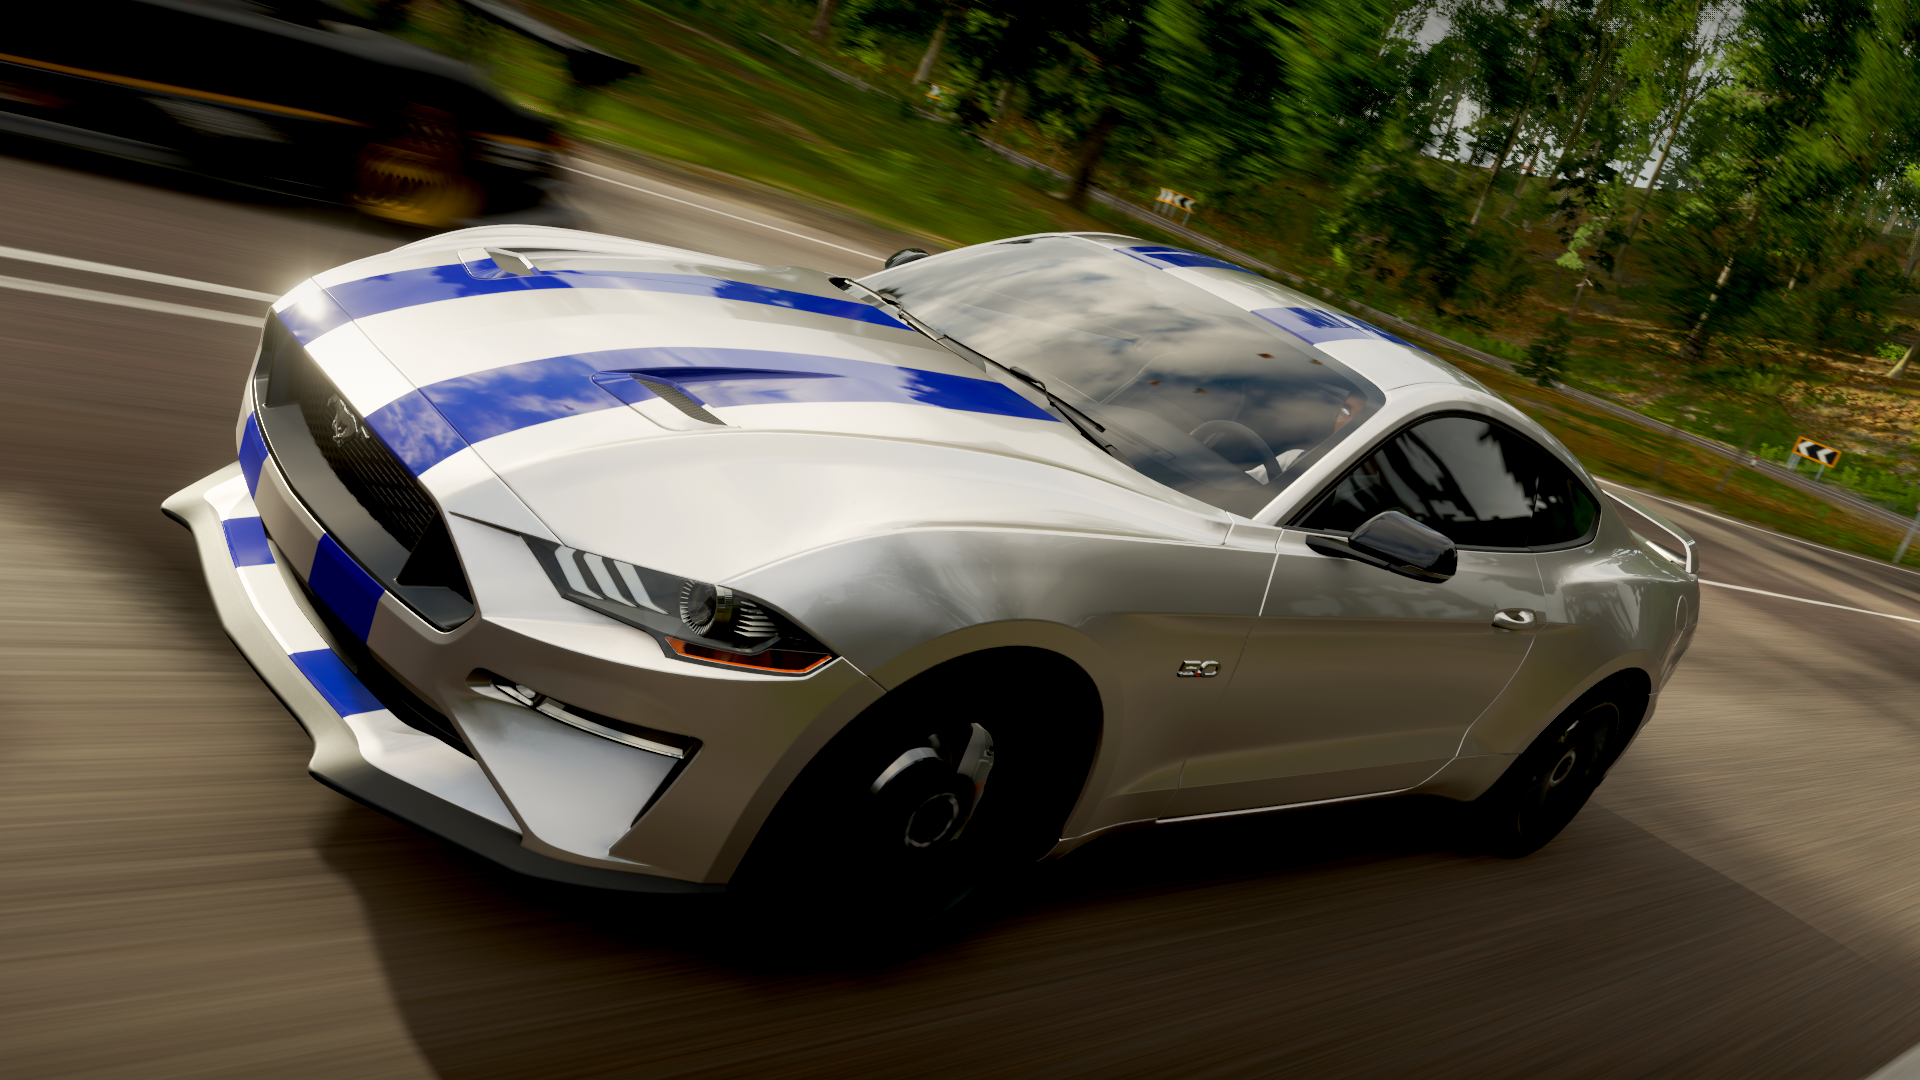 General 1920x1080 Shelby car Ford Ford Mustang Forza Horizon 4 CGI video games road frontal view trees blurry background blurred